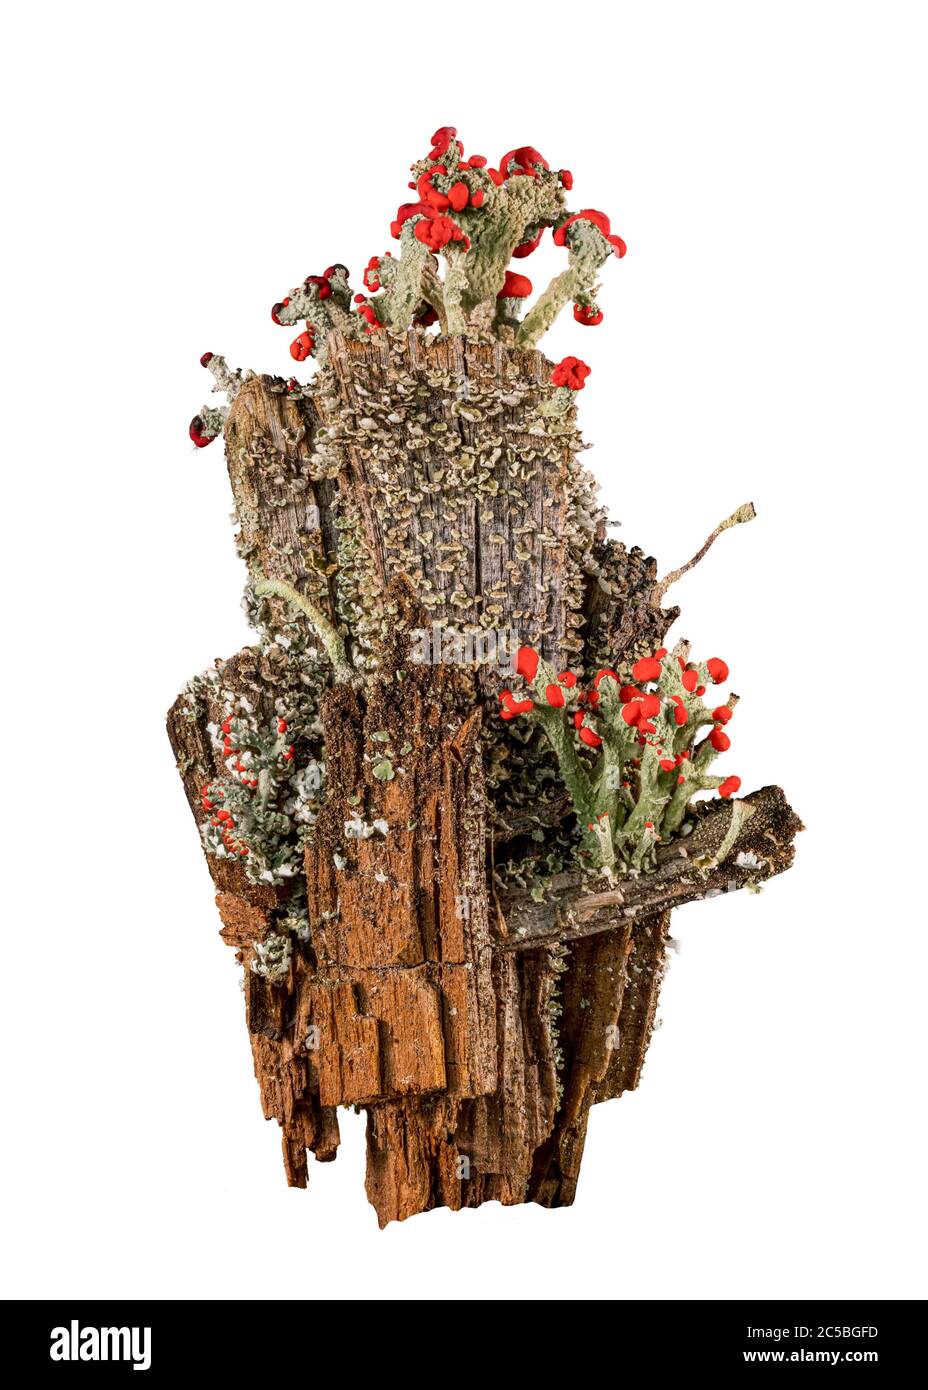 Cutout of Cladonia cristatella or British Soldiers Lichen growing on old wooden fence post in West Virginia against white background Stock Photo